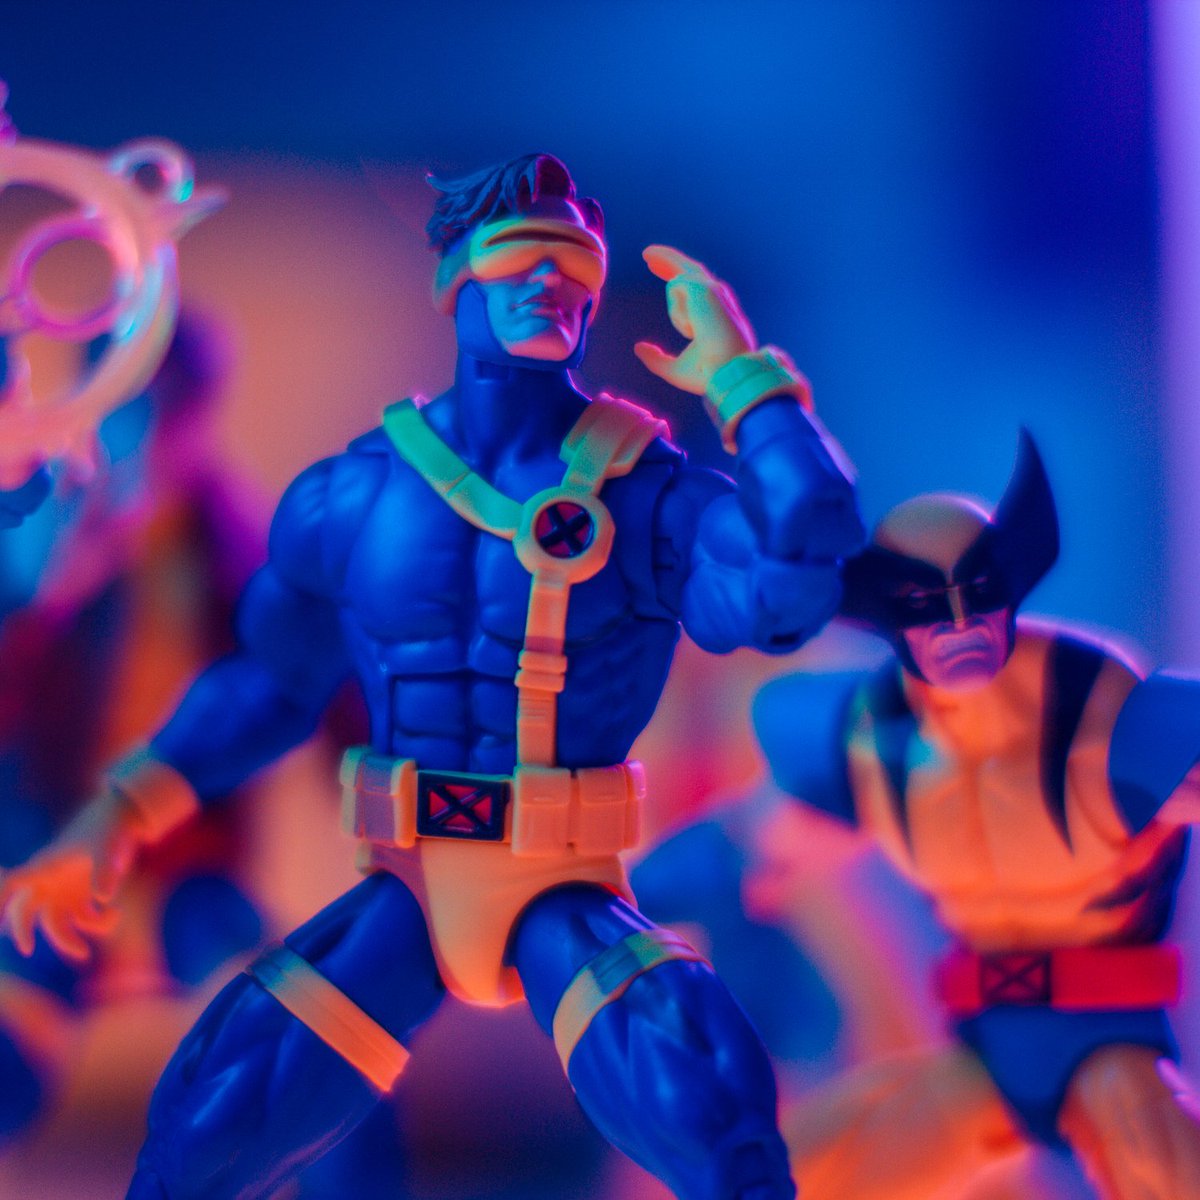 Last of the animated series.

@hasbro
@hasbropulse
#xmen #xmenanimatedseries #toybiz #hasbropulse #wolverine #kenner #tmnt #bravestarr #marvel #marvellegends #toys #toyphotography #toycollector #toycollection #actionfigurecollection #actionfigurephotography #actionfigurecollector